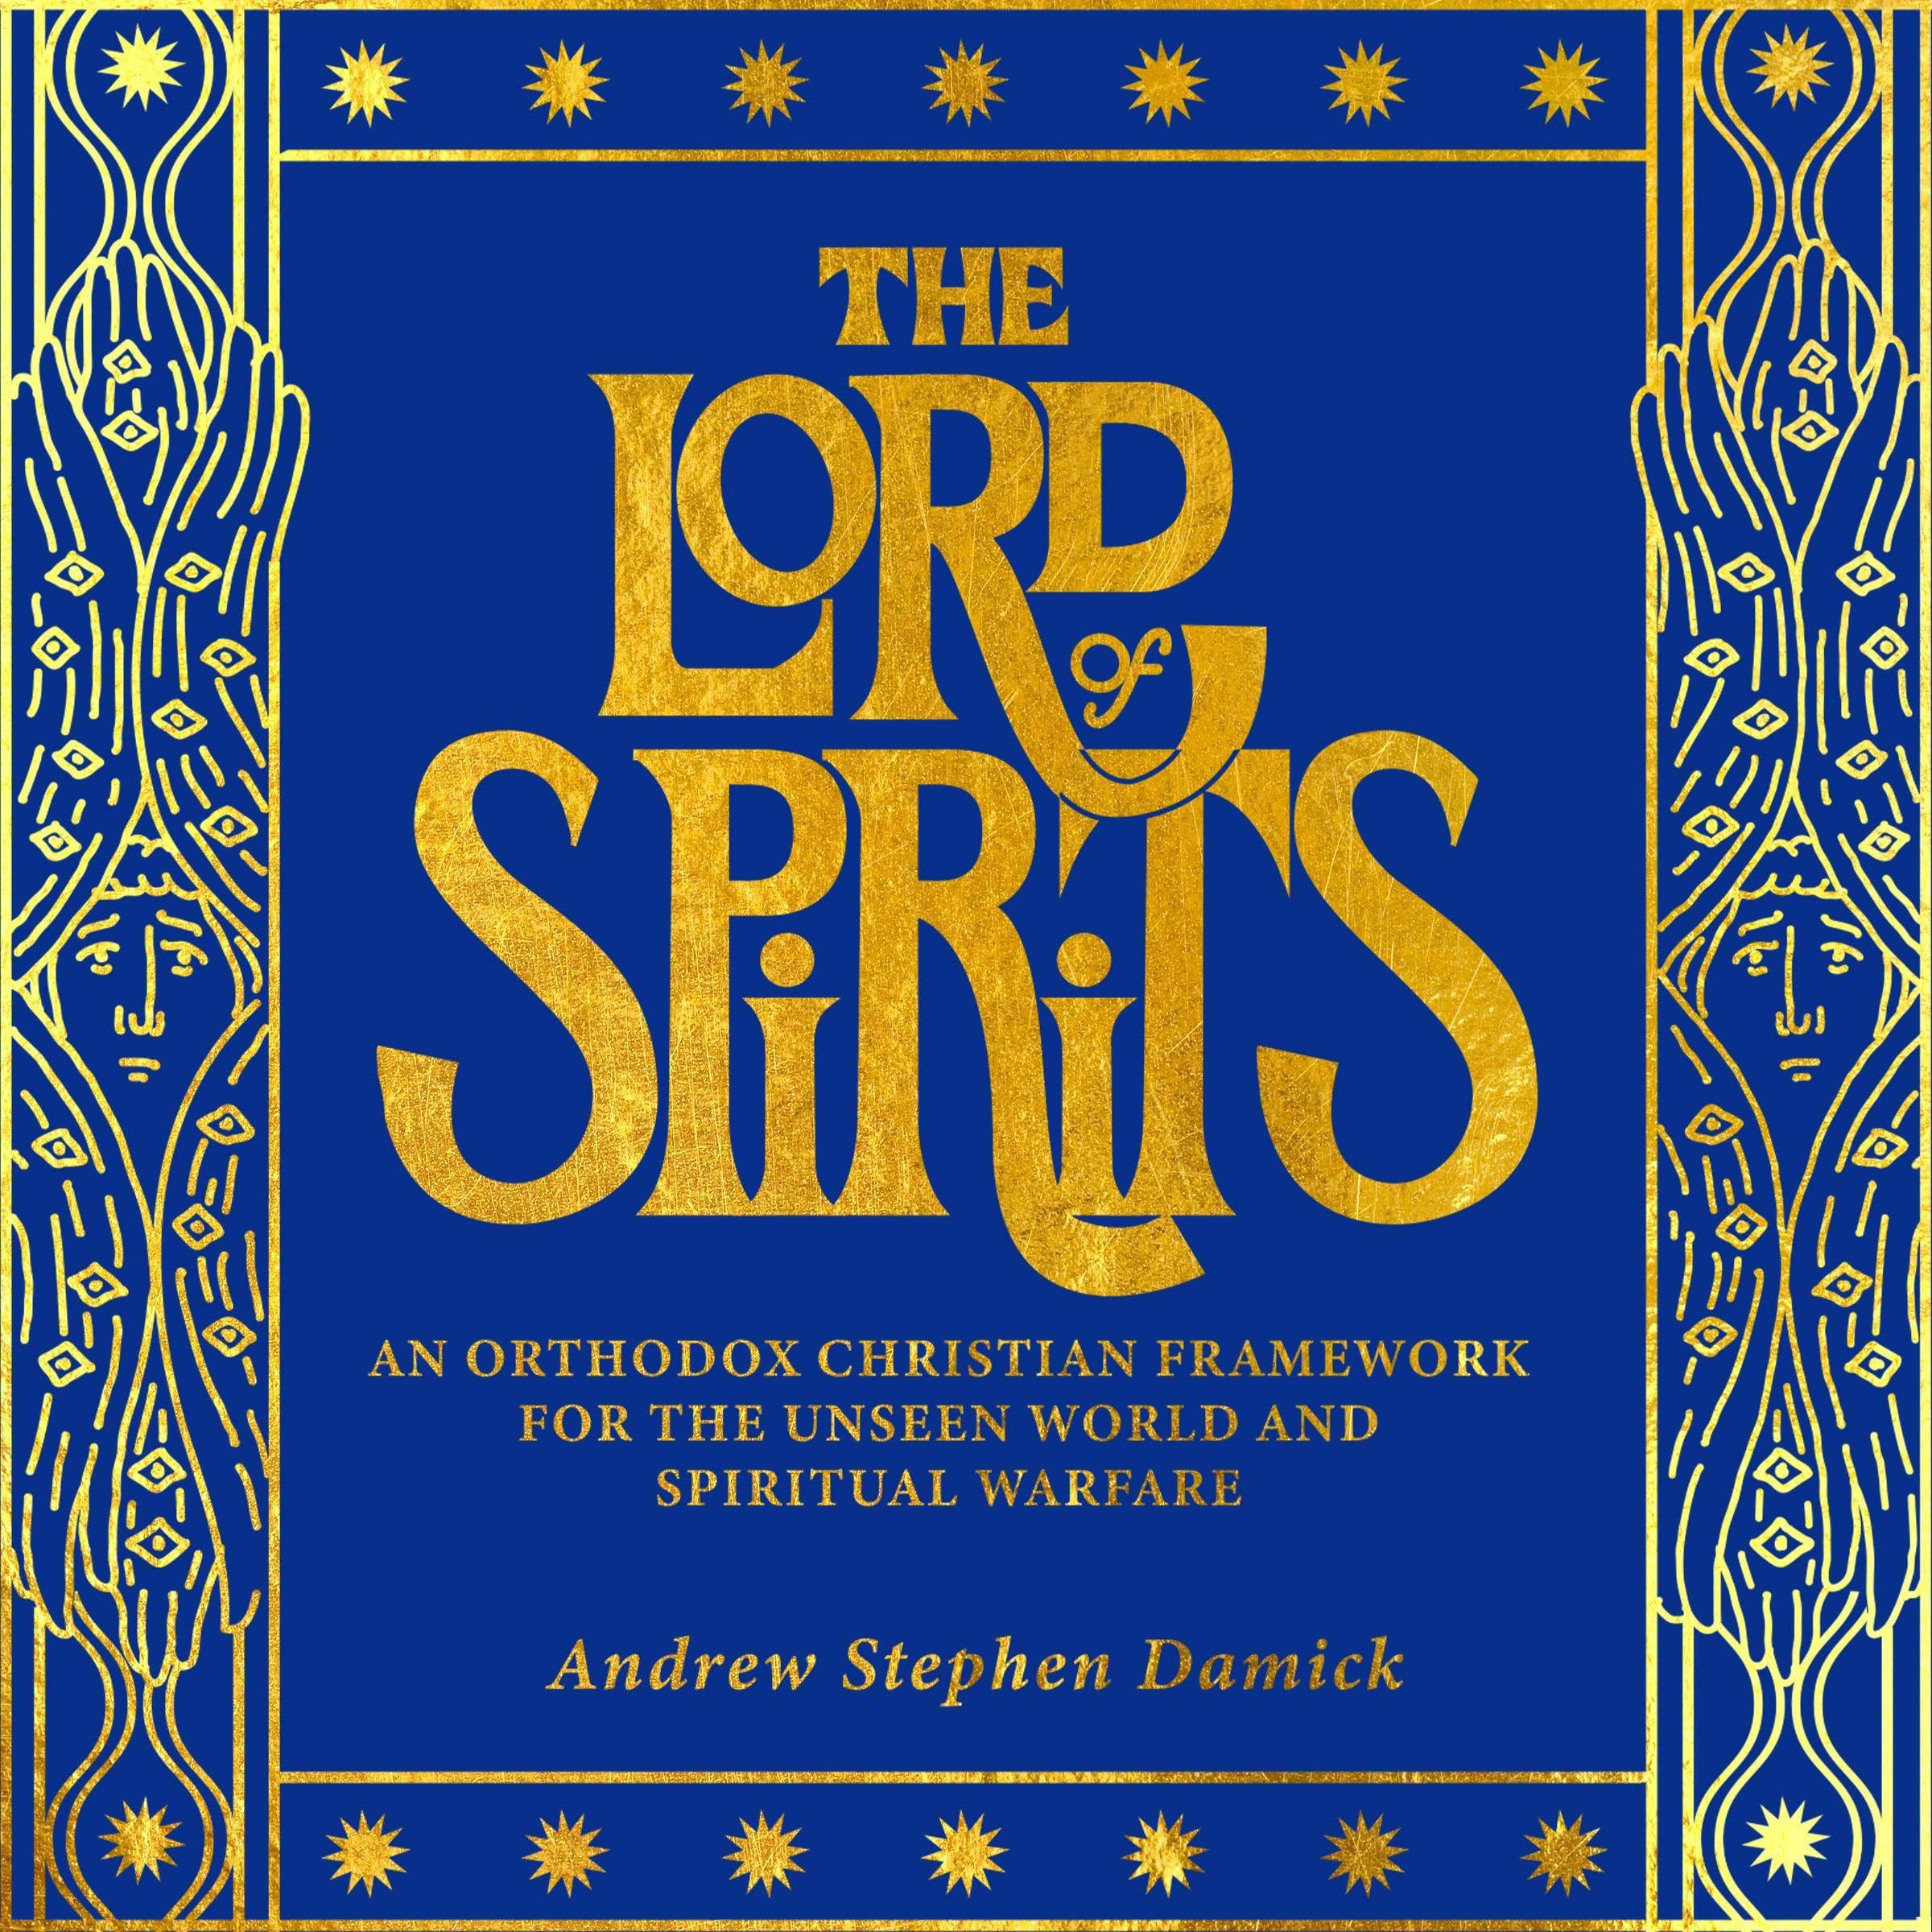 The Lord of Spirits: An Orthodox Christian Framework for the Unseen World and Spiritual Warfare